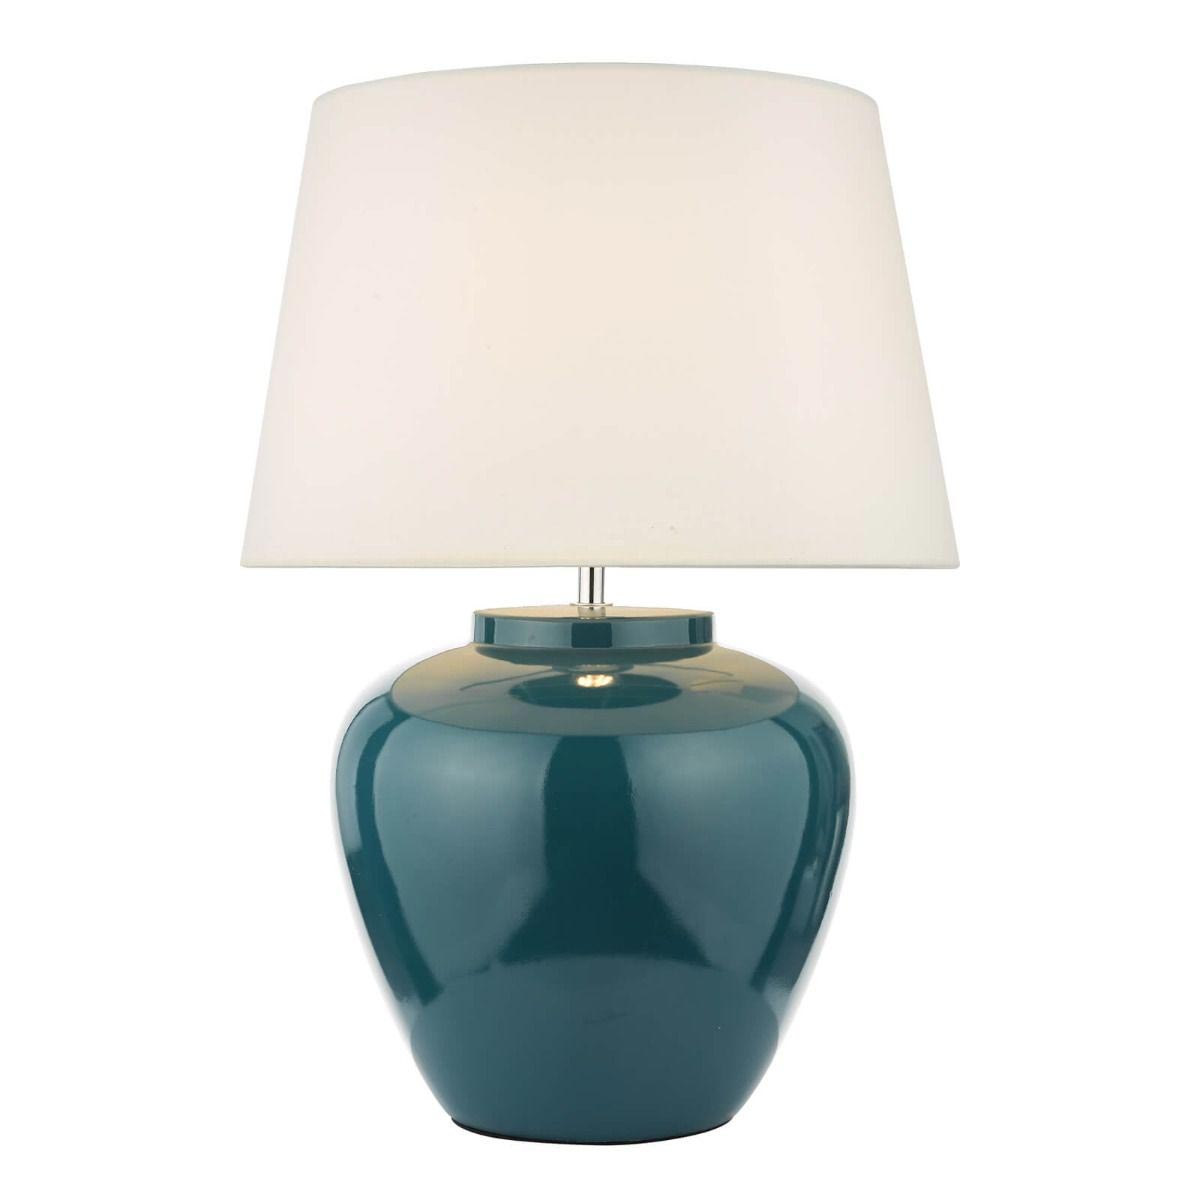 Dar Ayla 1 Light Teal Ceramic Table Lamp With White Shade